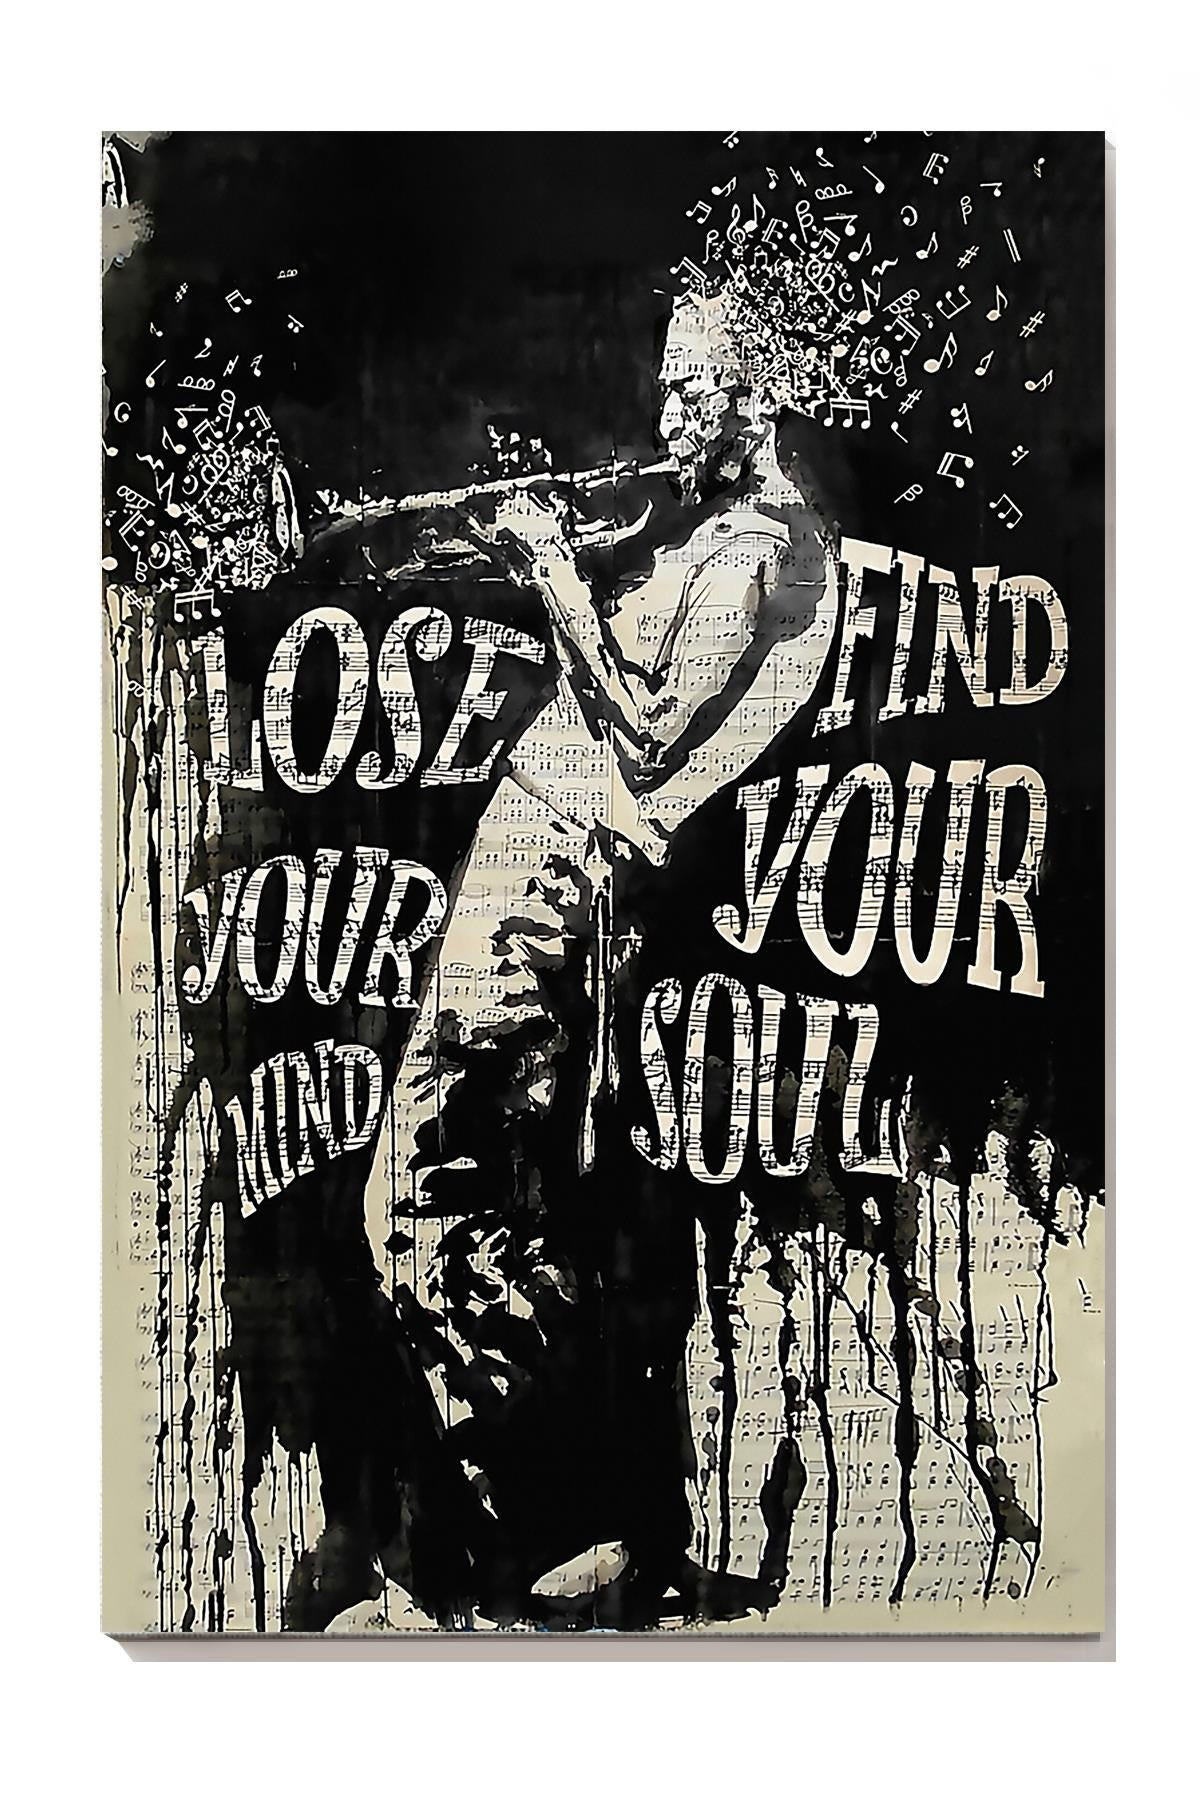 Trumpet Lose Your Mind Find Your Soul Gallery Canvas Painting For Trumpet Lover Music Studio Decor Canvas Gallery Painting Wrapped Canvas Framed Prints, Canvas Paintings Wrapped Canvas 8x10